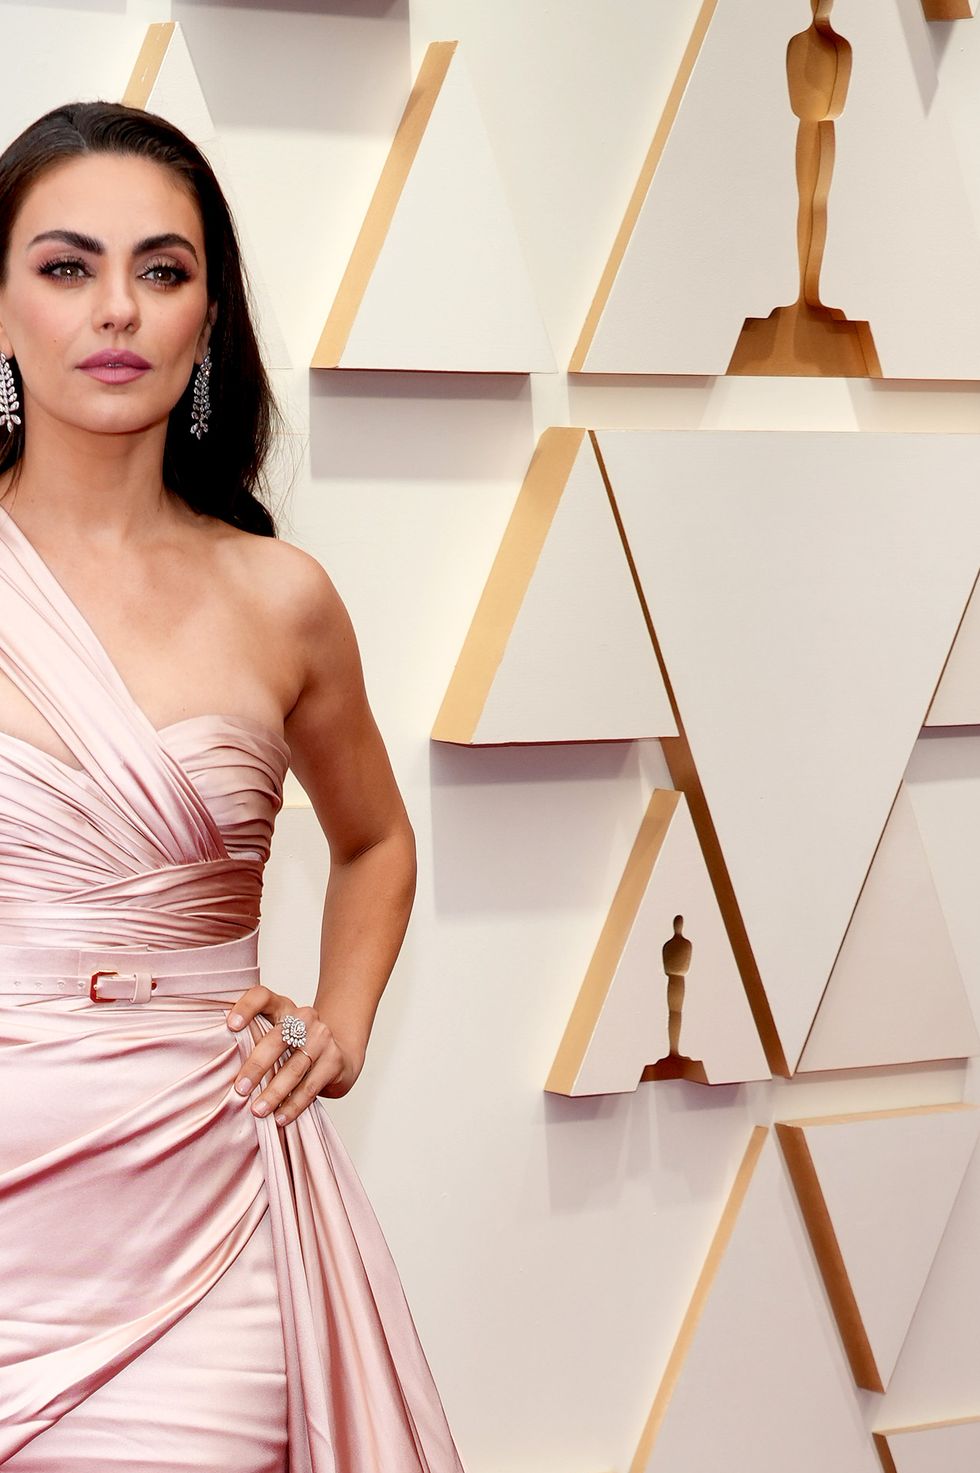 Best Red Carpet Jewelry on Stars at the 2022 Oscars – The Hollywood Reporter